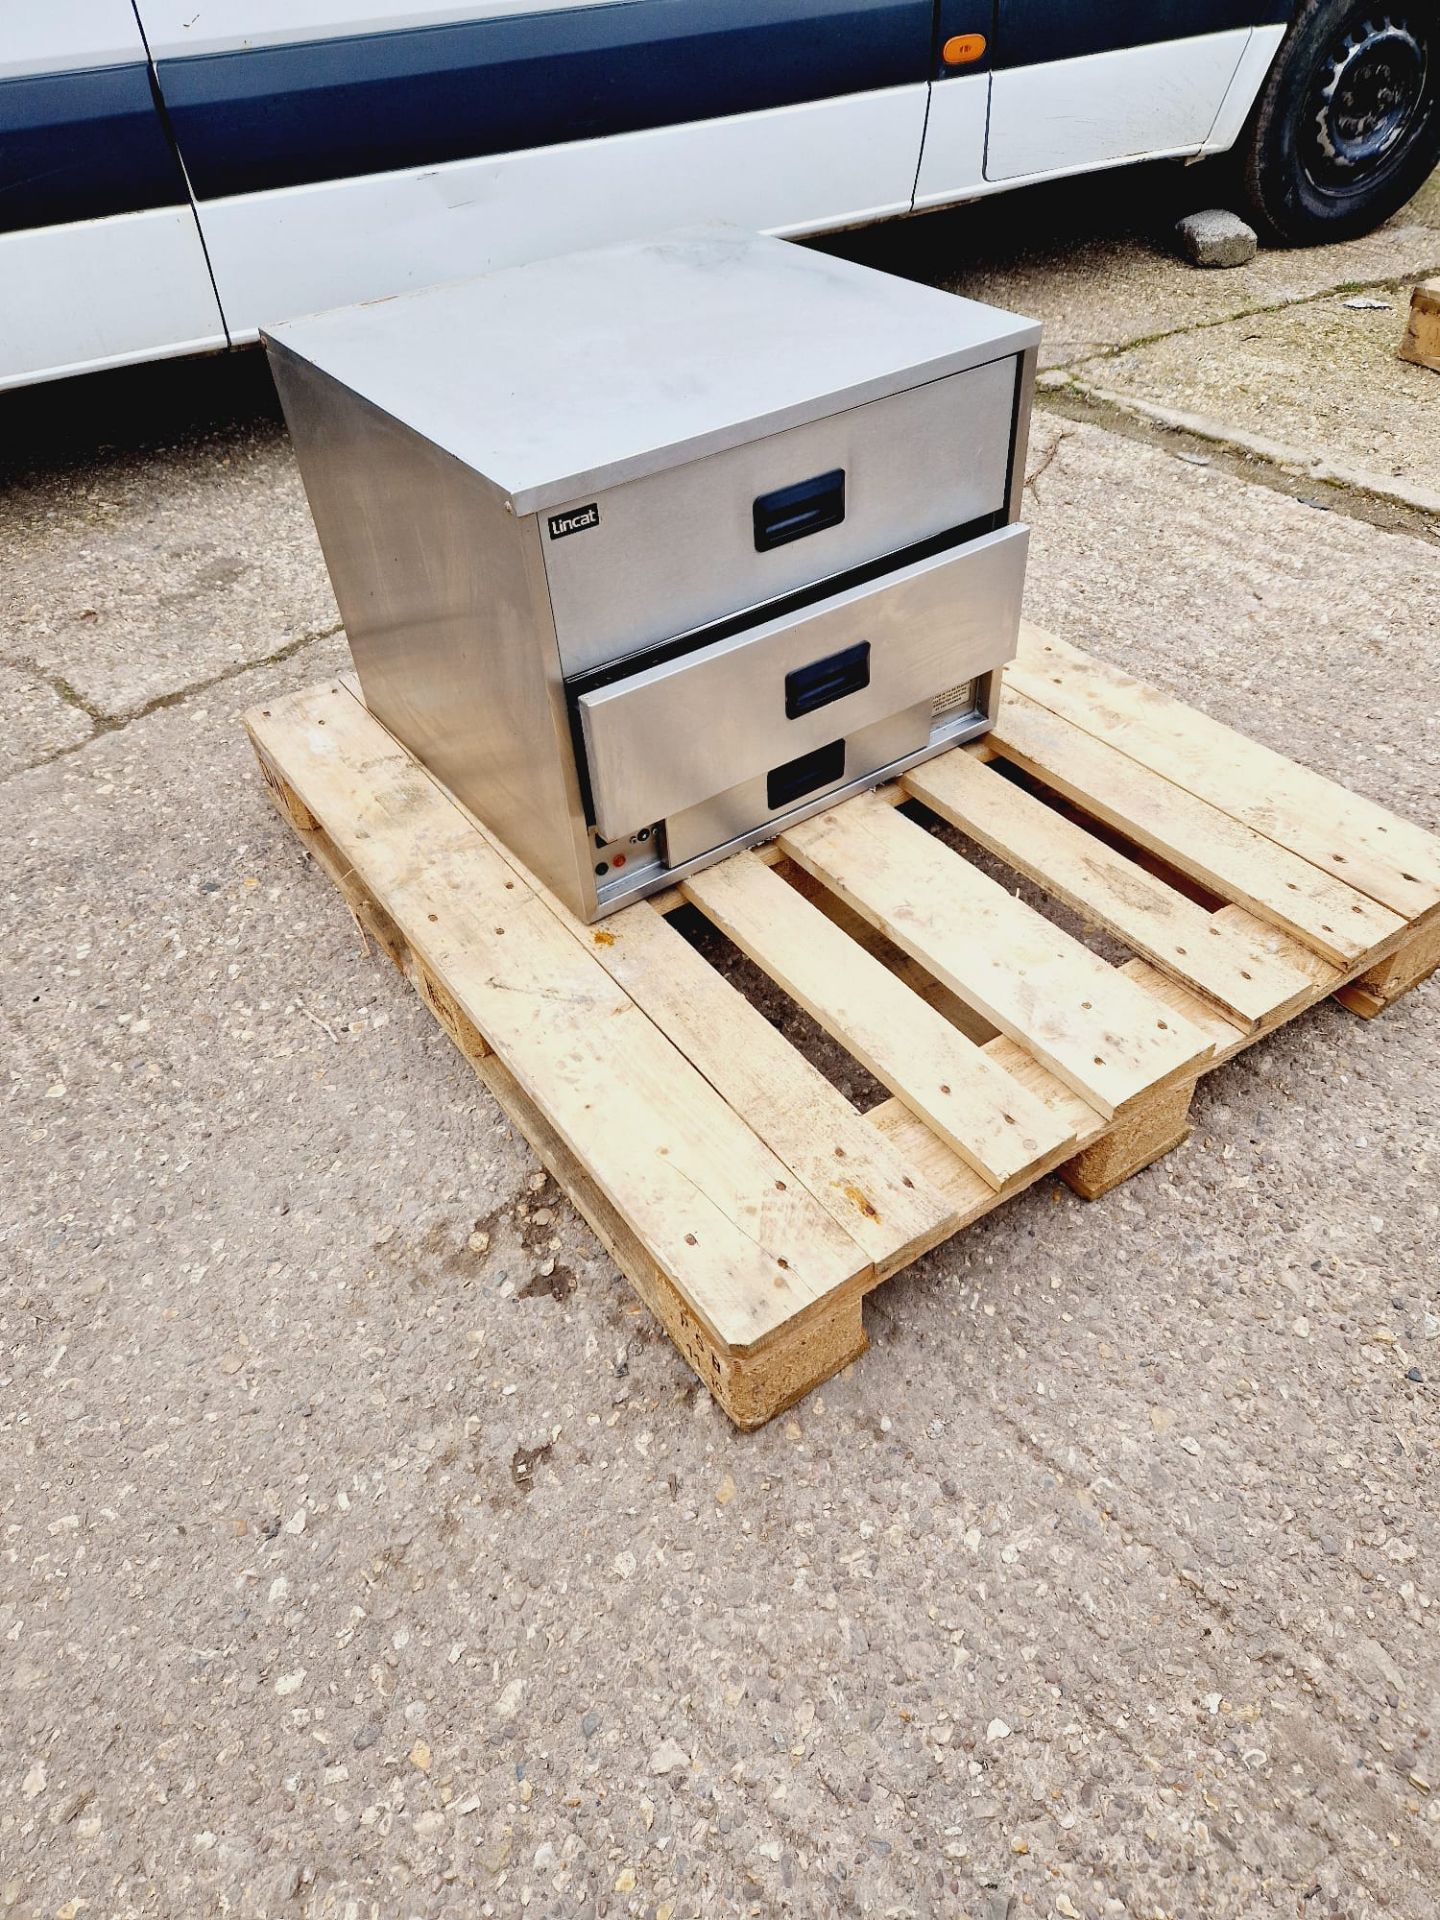 LINCAT HOT HOLDER CABINET DOUBLE DRAWER - FULLY WORKING, TESTED AND SERVICED